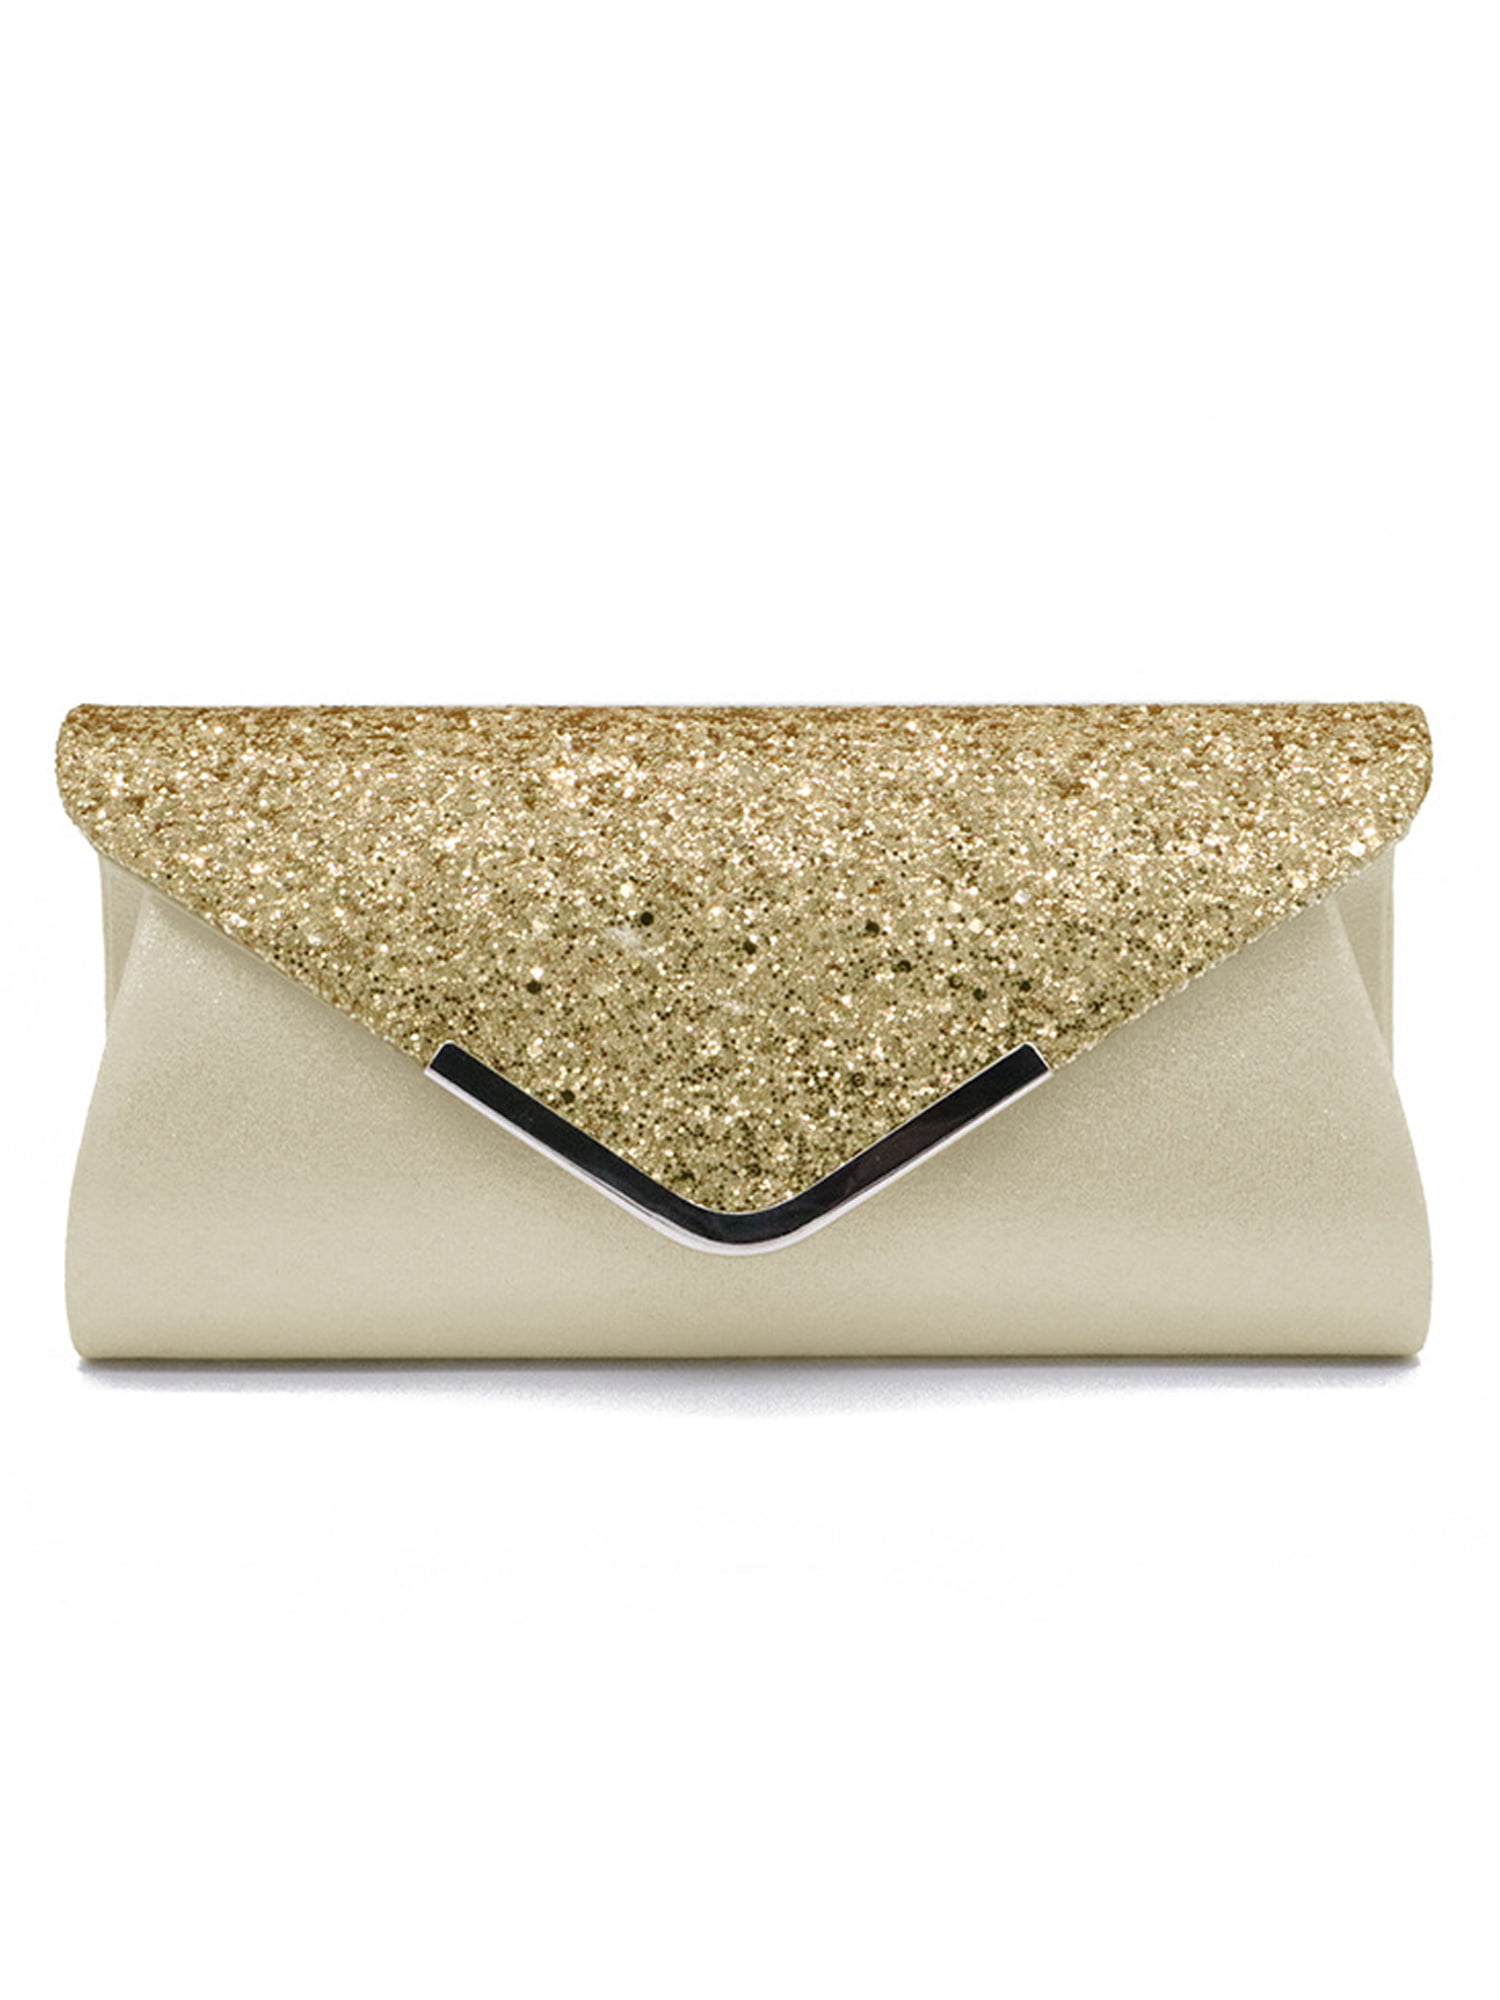 Gold Glitter Clutch Purse, from Beads by the Dozen